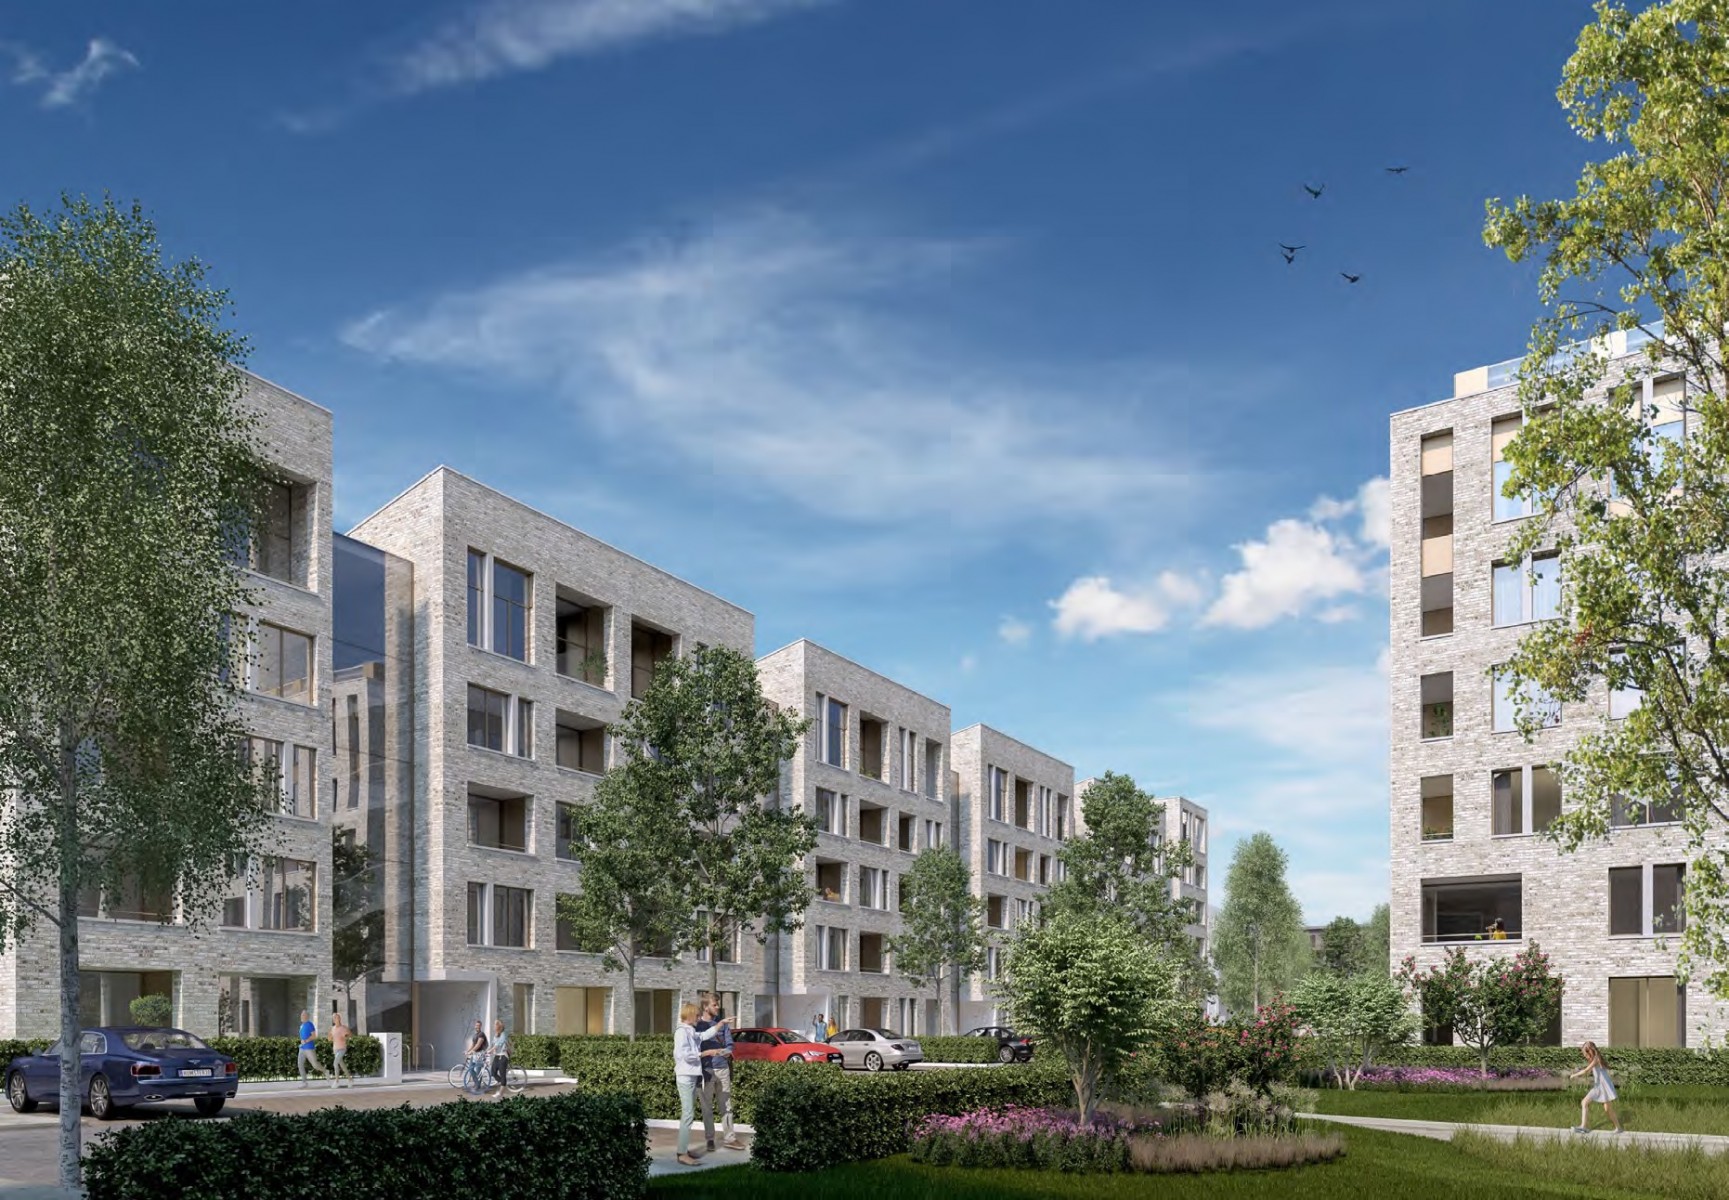 Plans lodged for three residential blocks in Finnieston